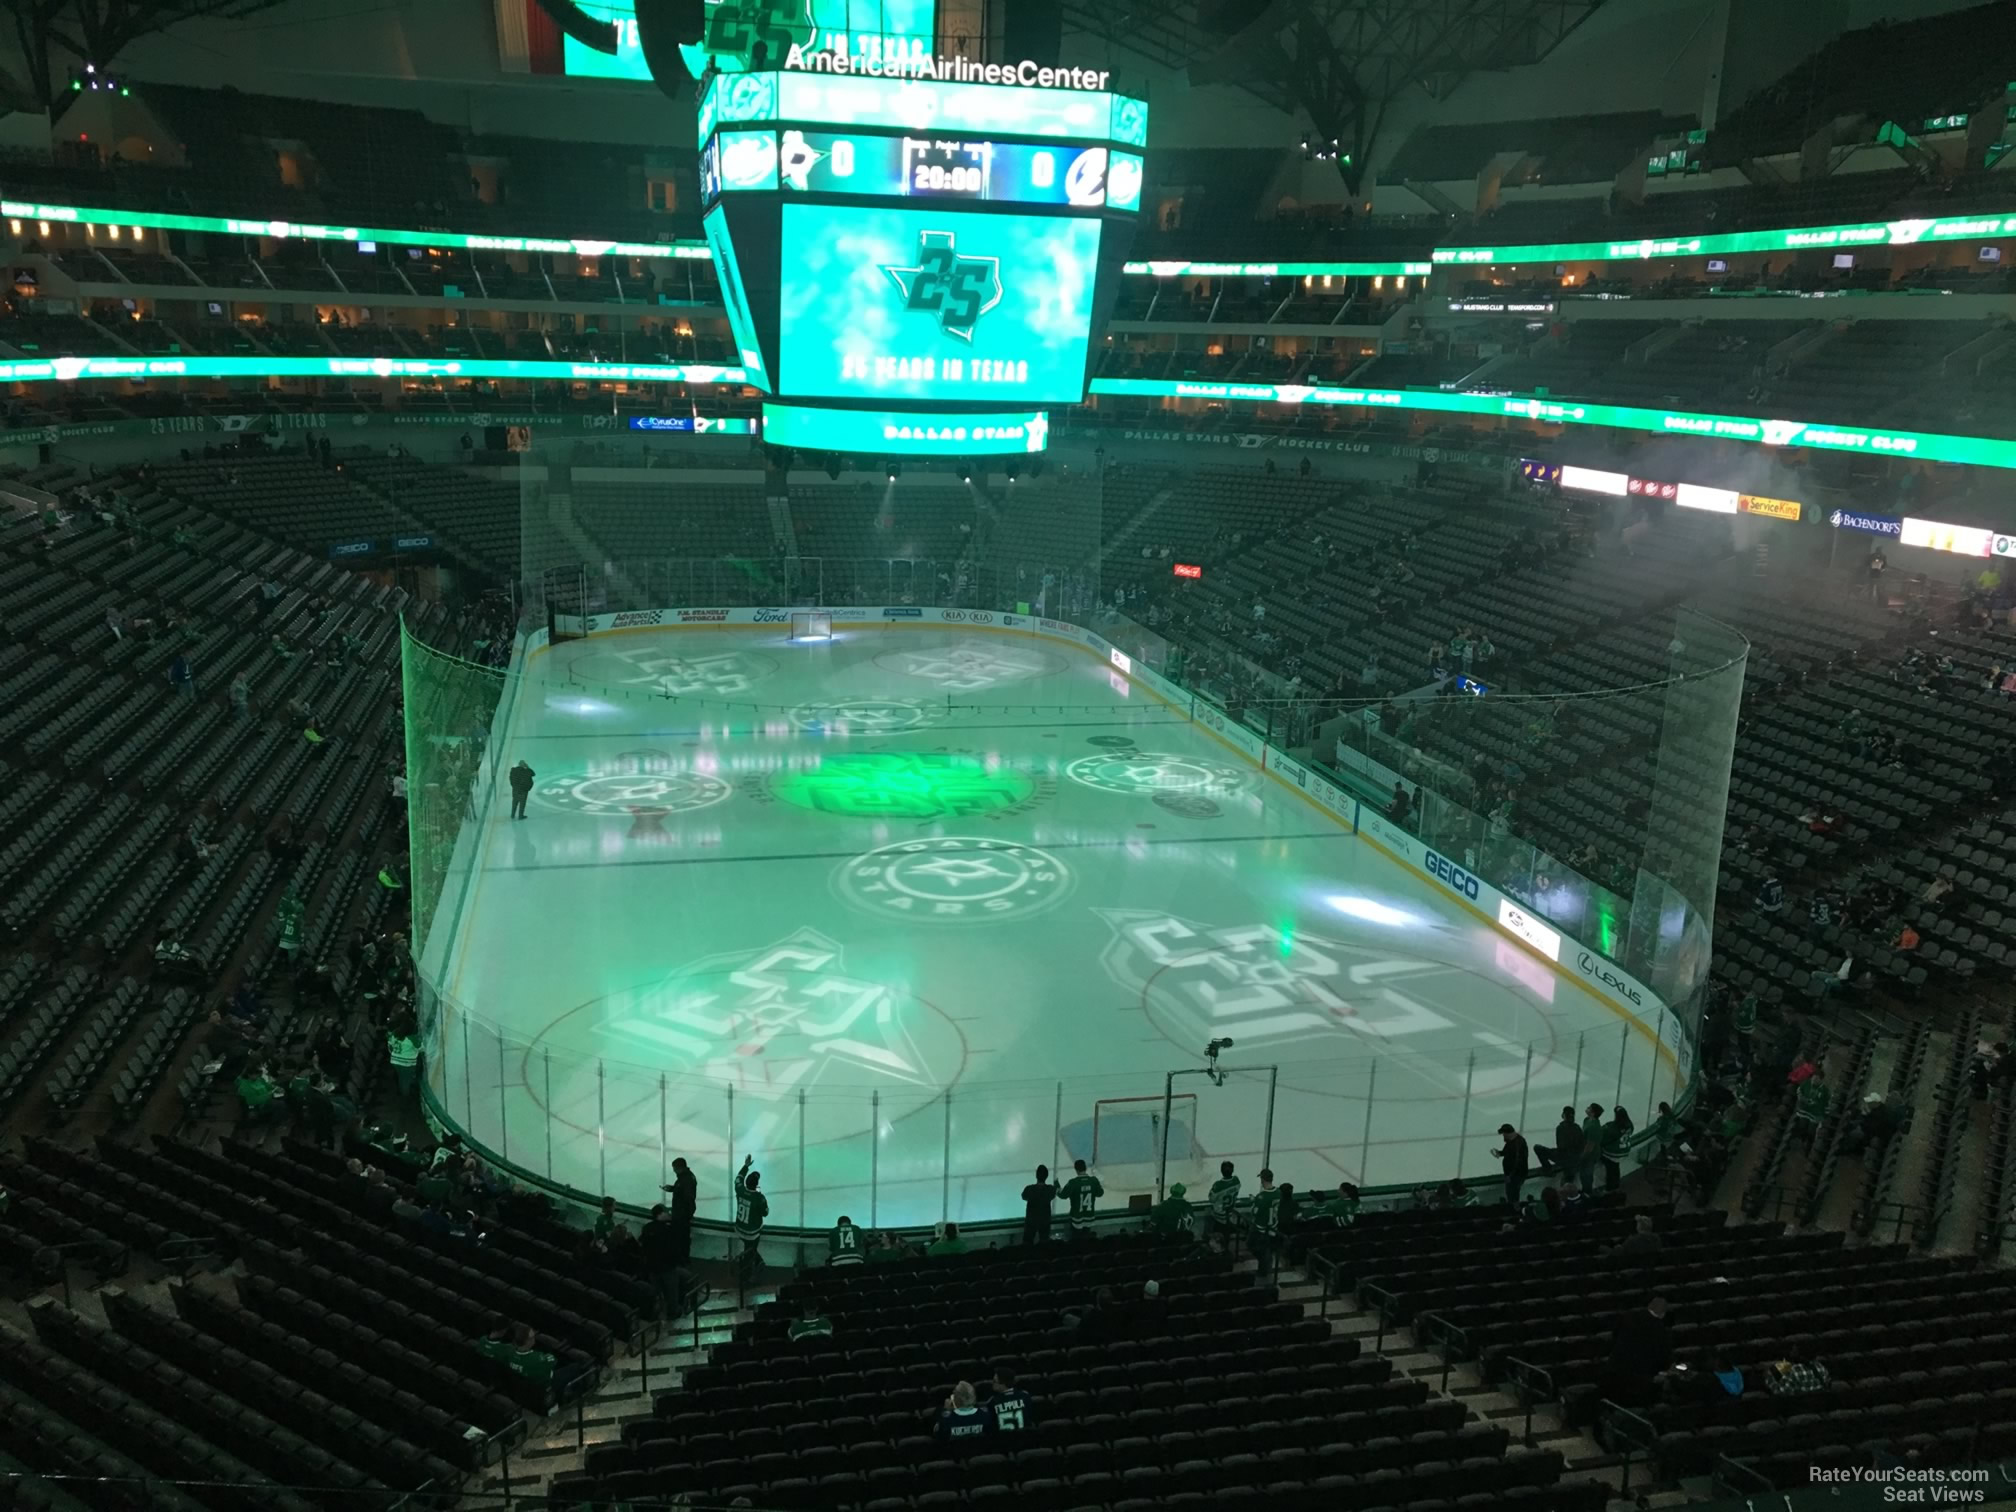 section 202, row d seat view  for hockey - american airlines center